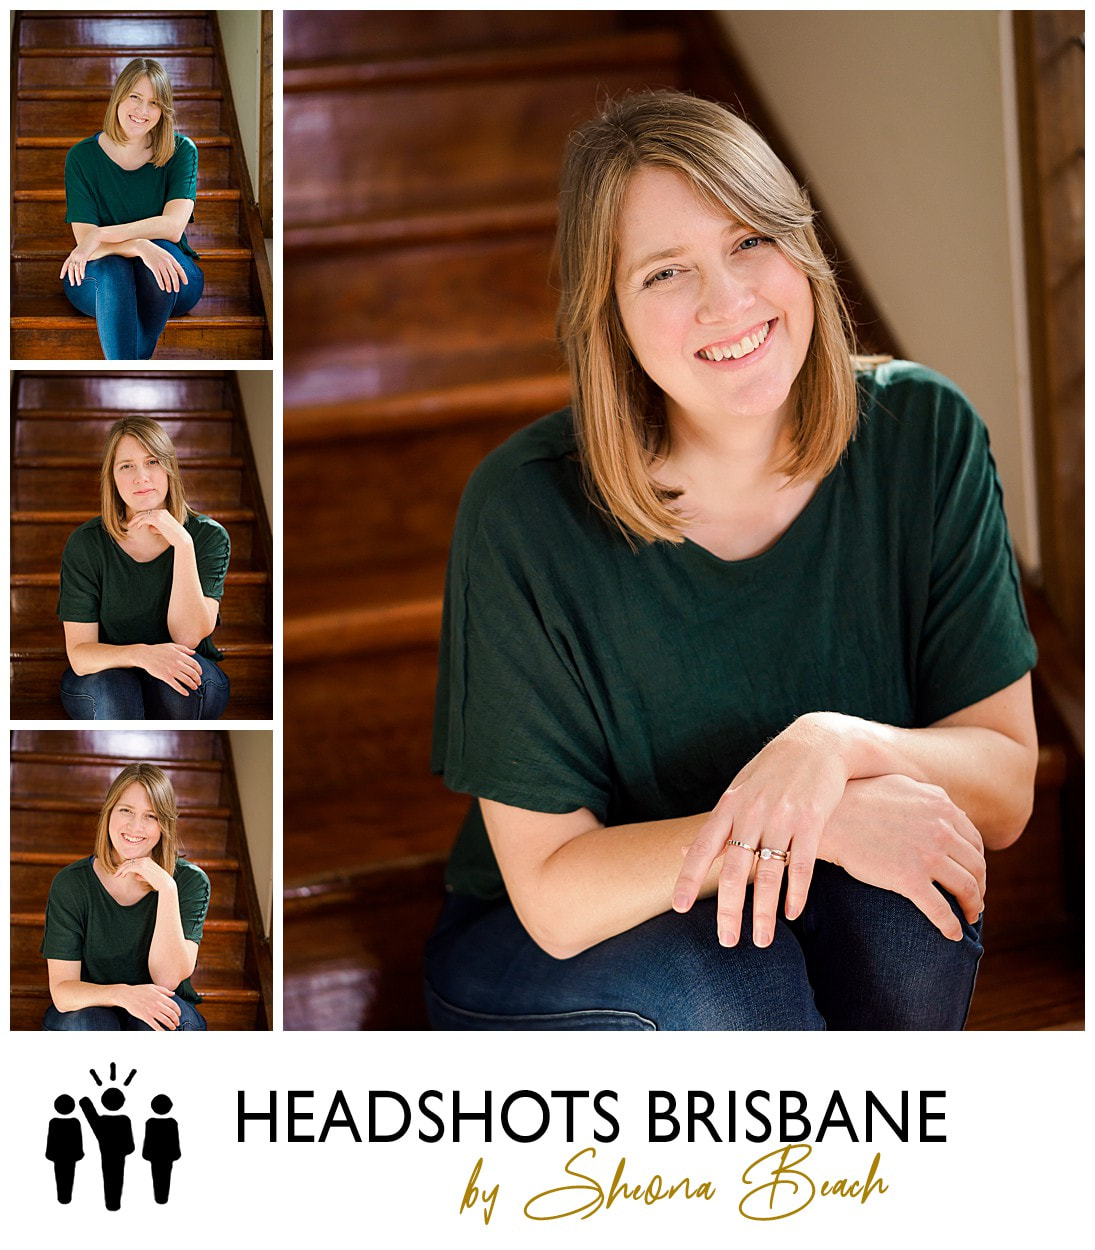 Headshots and portrait of female pianist by Brisbane photographer